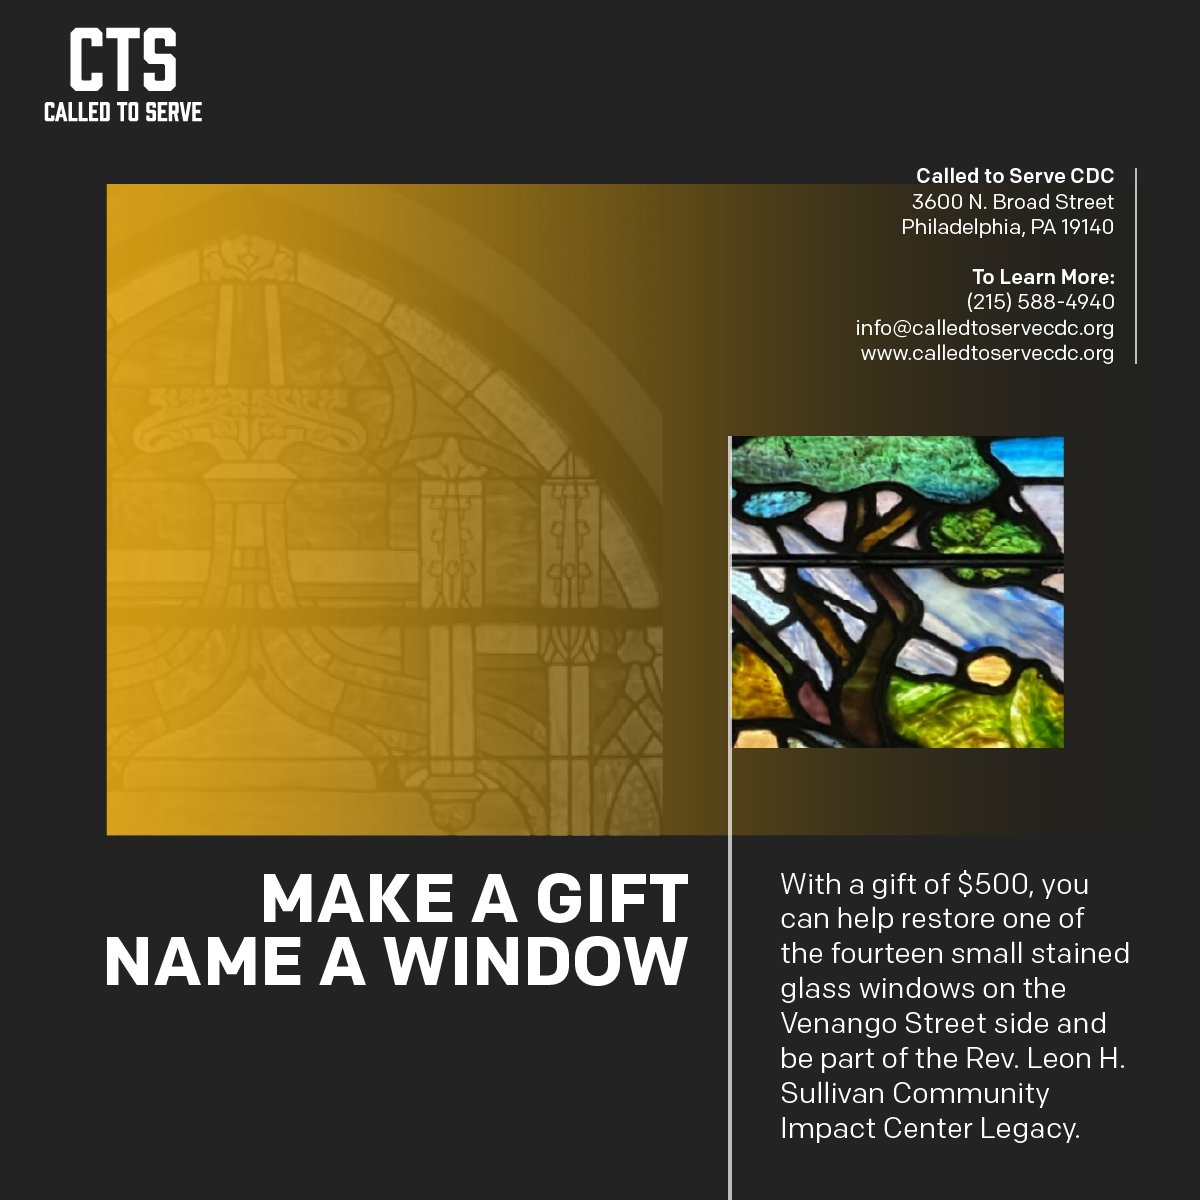 Make a Gift and Name a Window! With a gift of $500, you can help restore one of the fourteen small stained glass windows on the Venango Street side and be part of the Rev. Leon H. Sullivan Community Impact Center Legacy. Donate: secure.lglforms.com/form_engine/s/…